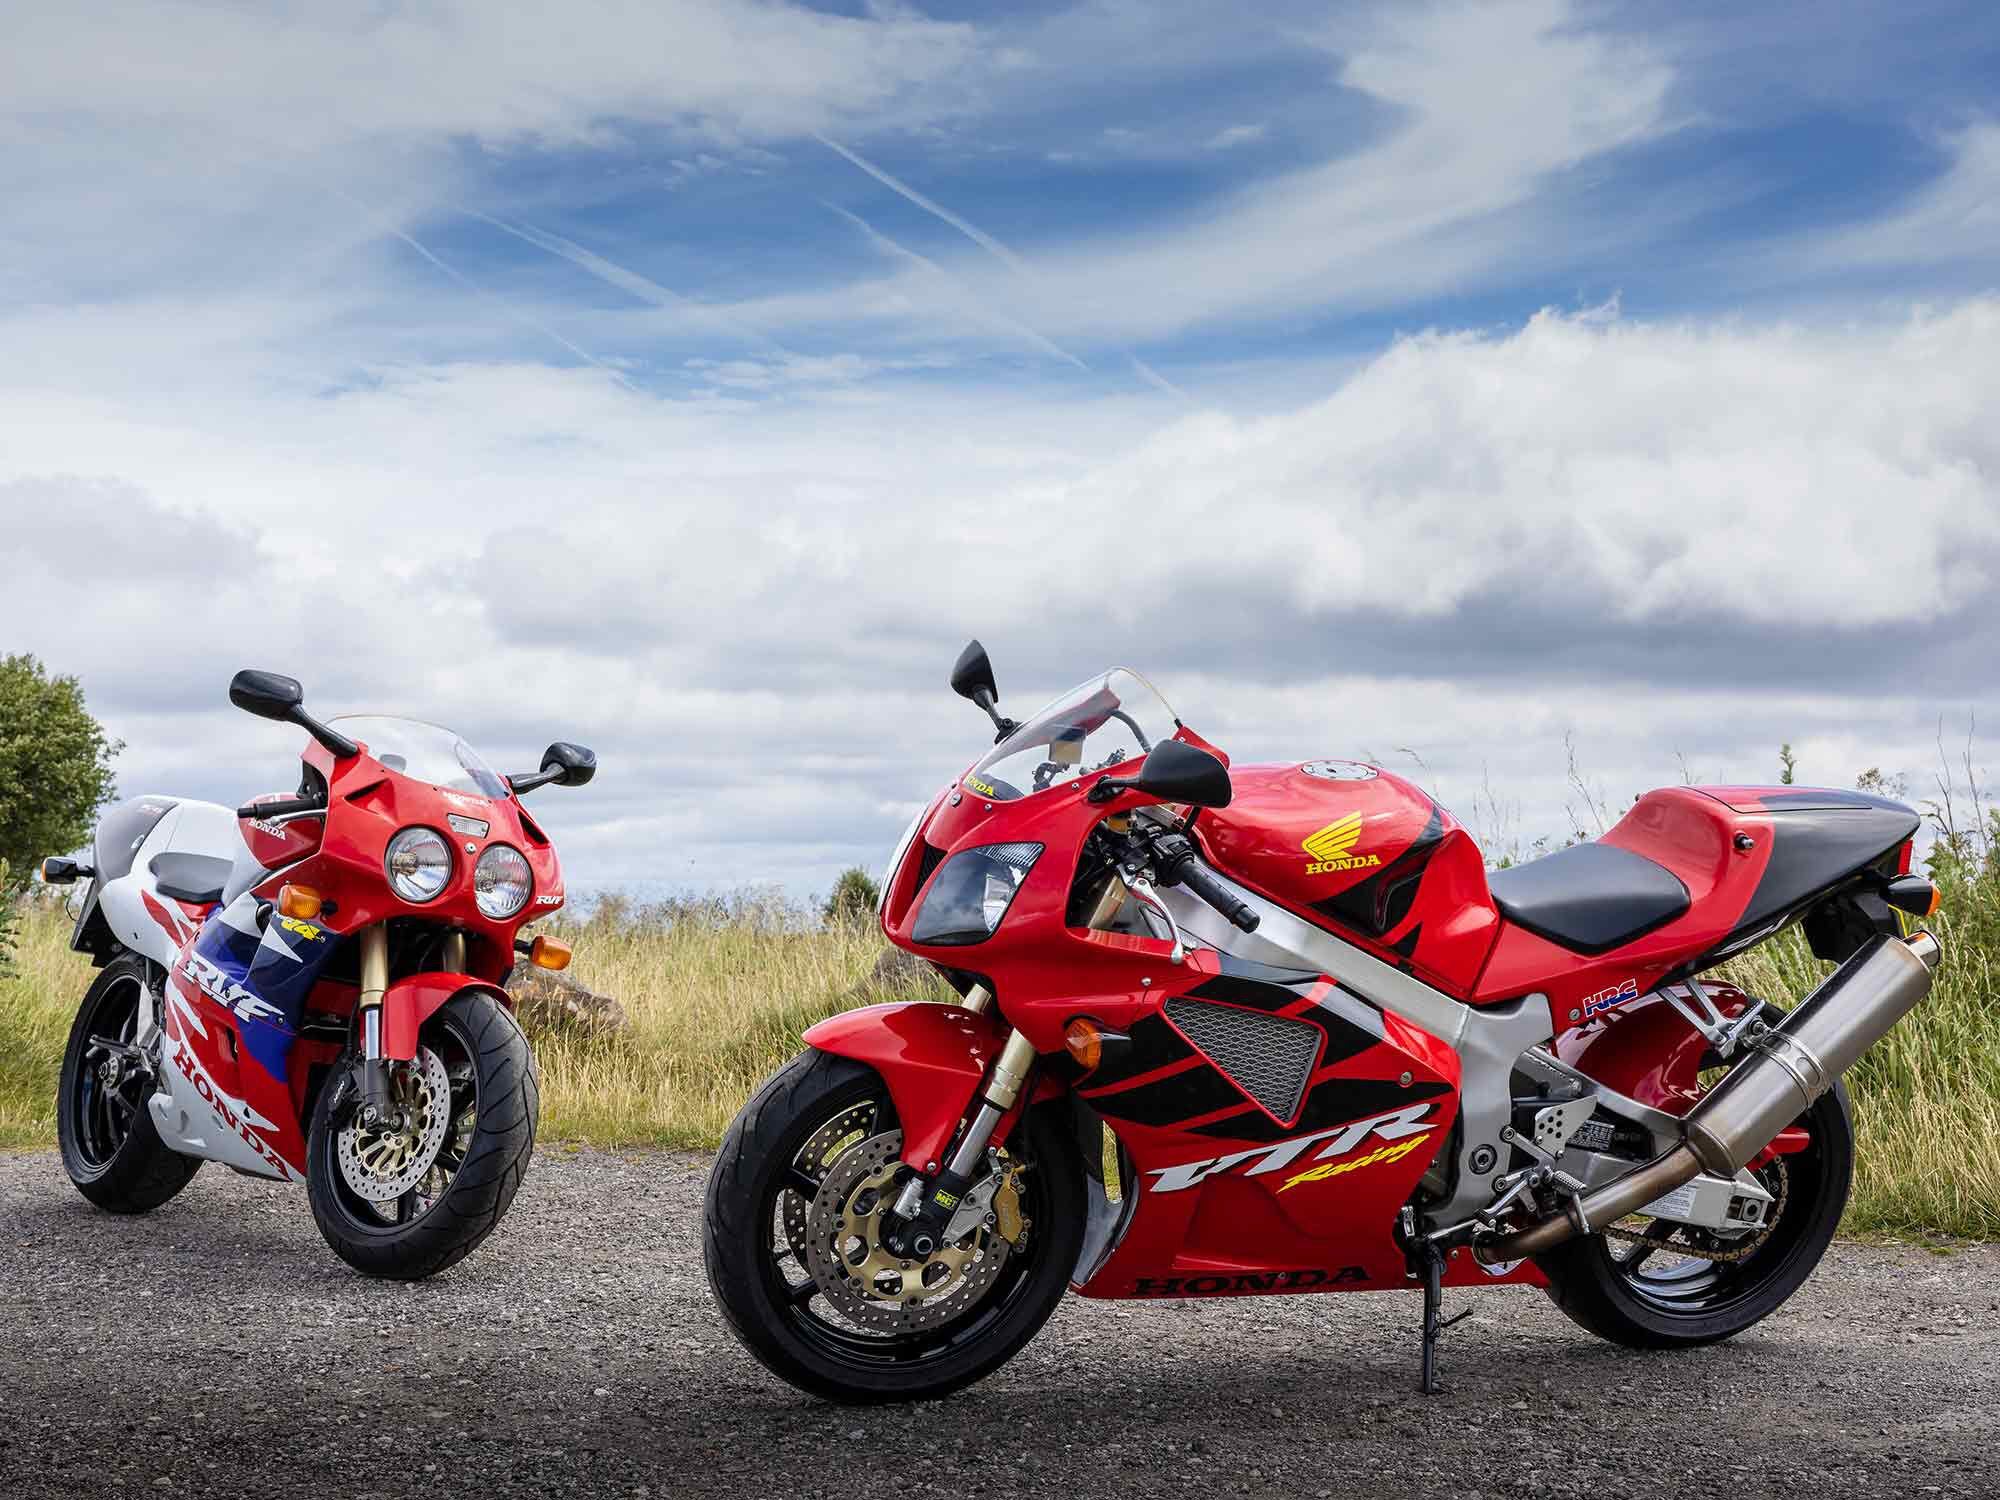 Honda’s RC45 on the left and RC51 on the right.